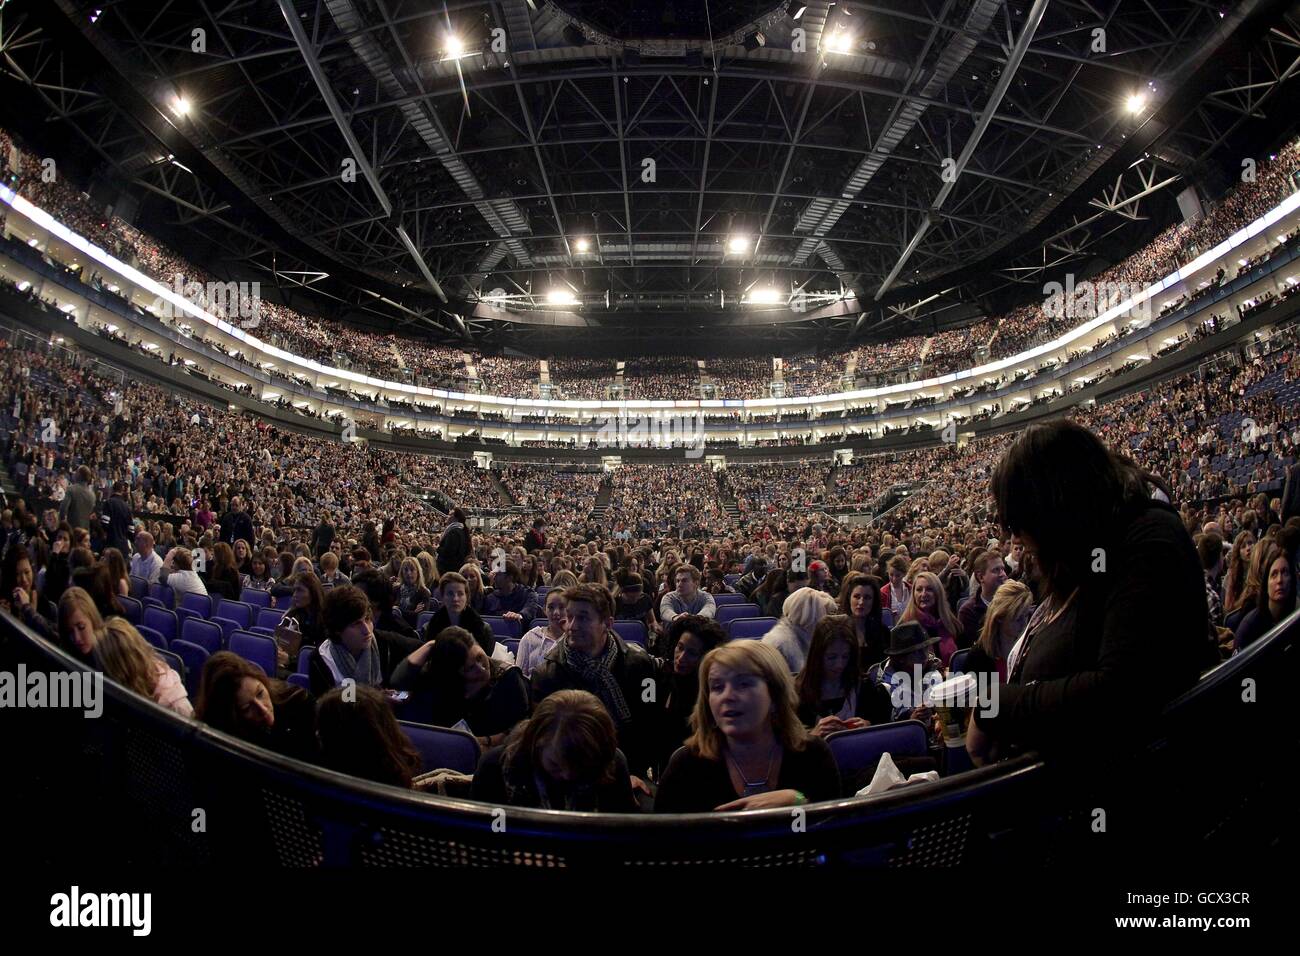 A view of the crowd during Capital FM's Jingle Bell Ball at the O2 Arena,  London Stock Photo - Alamy